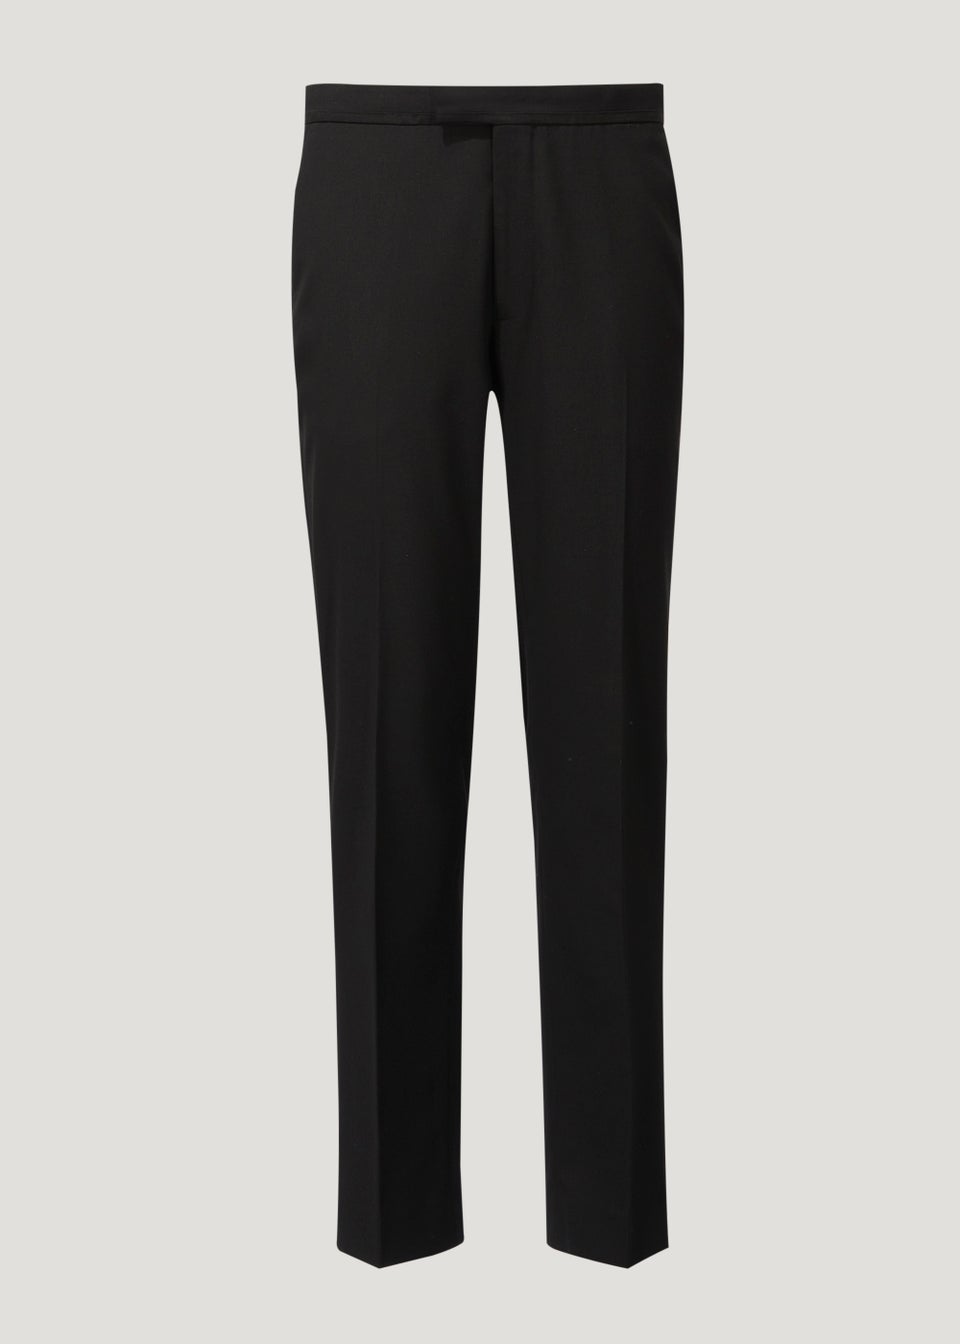 Taylor & Wright Black Tailored Fit Dinner Suit Trousers